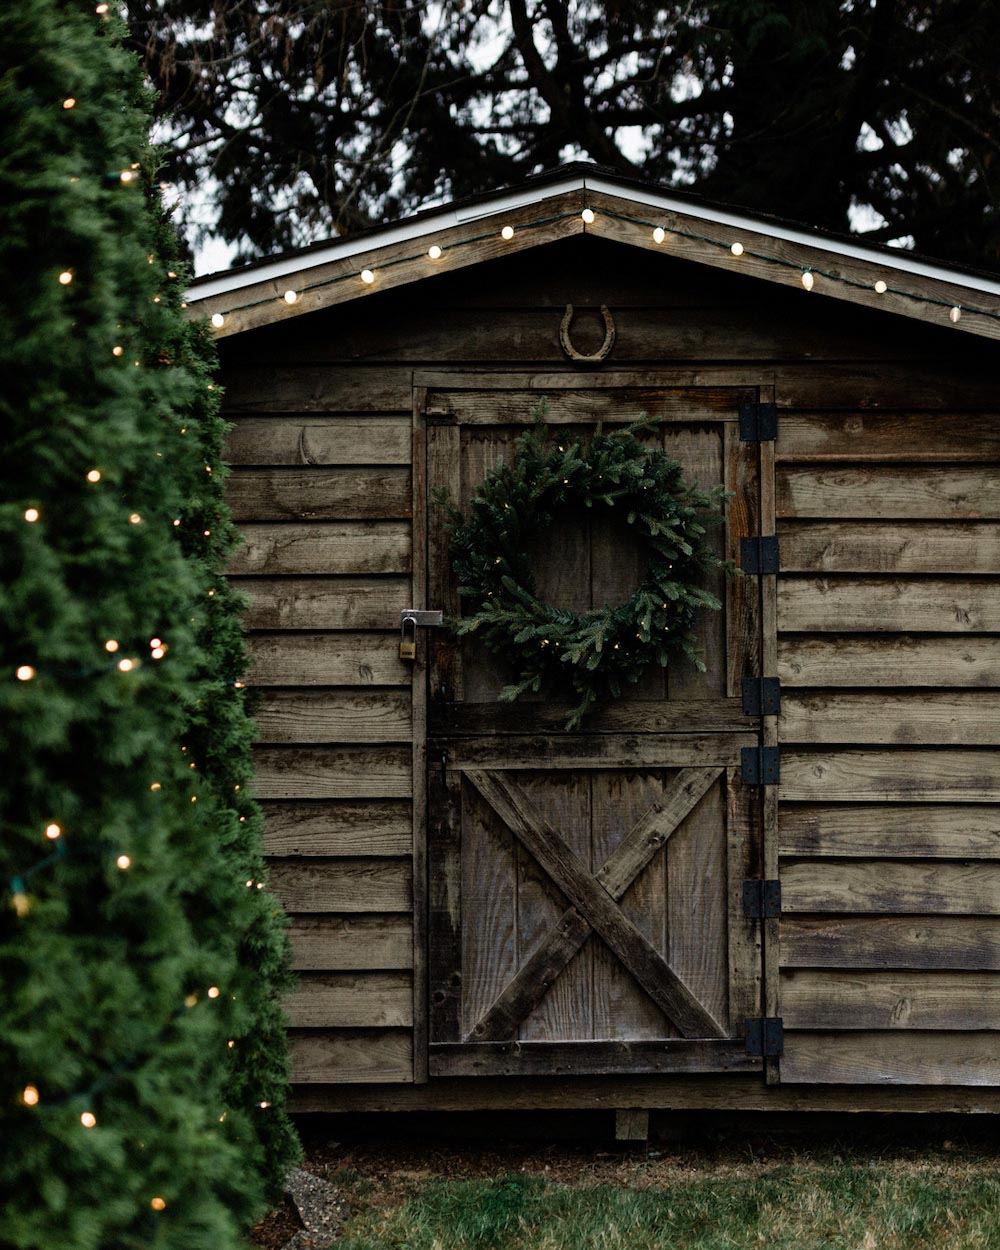 Wooden shed with wreath on the front door with string lights hanging from the roof